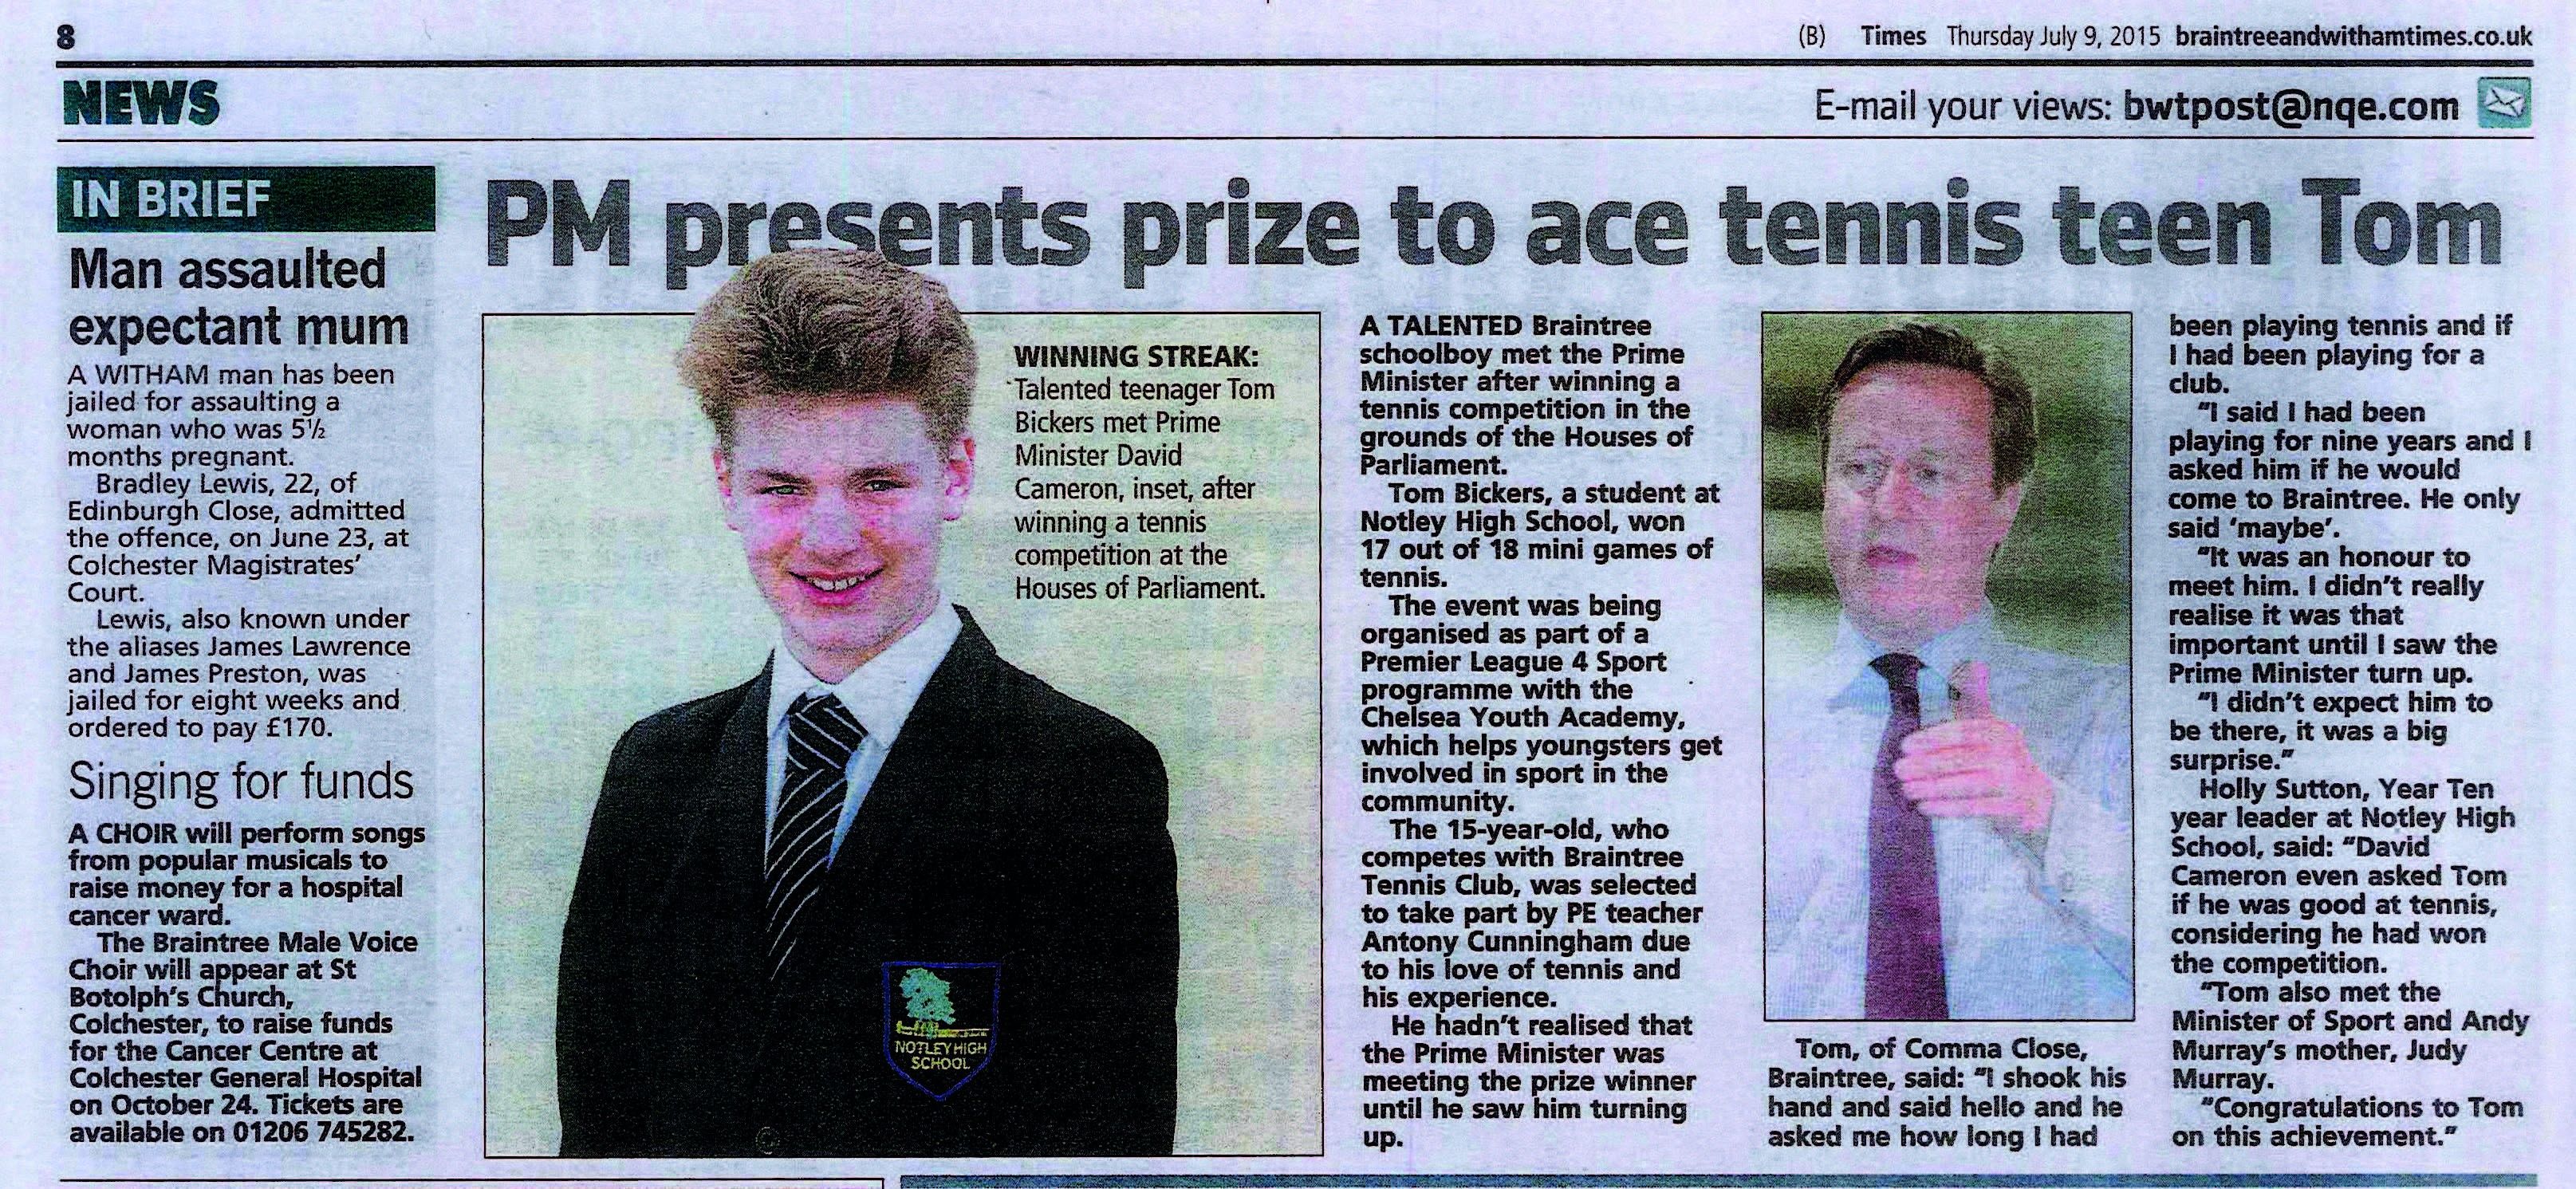 PM Presents Prize to Ace Tennis Teen Tom